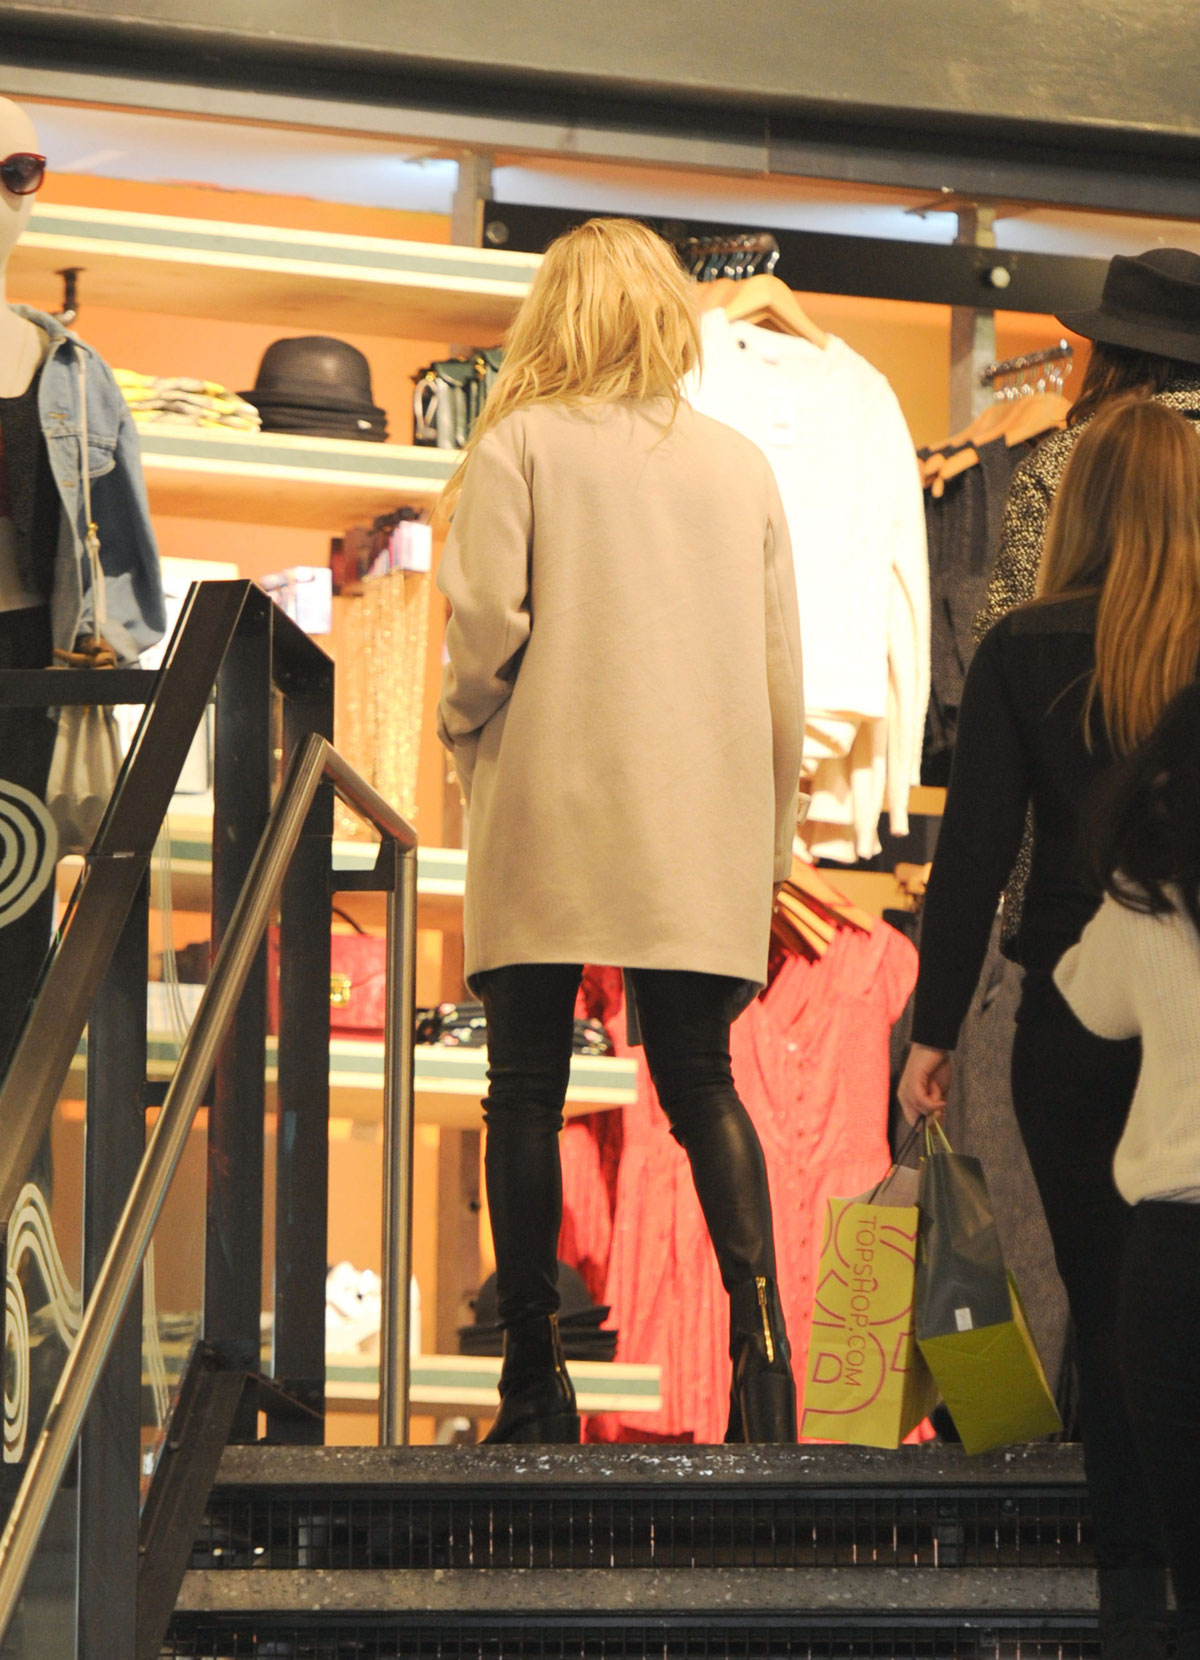 Ellie Goulding shopping at Urban Outfitters